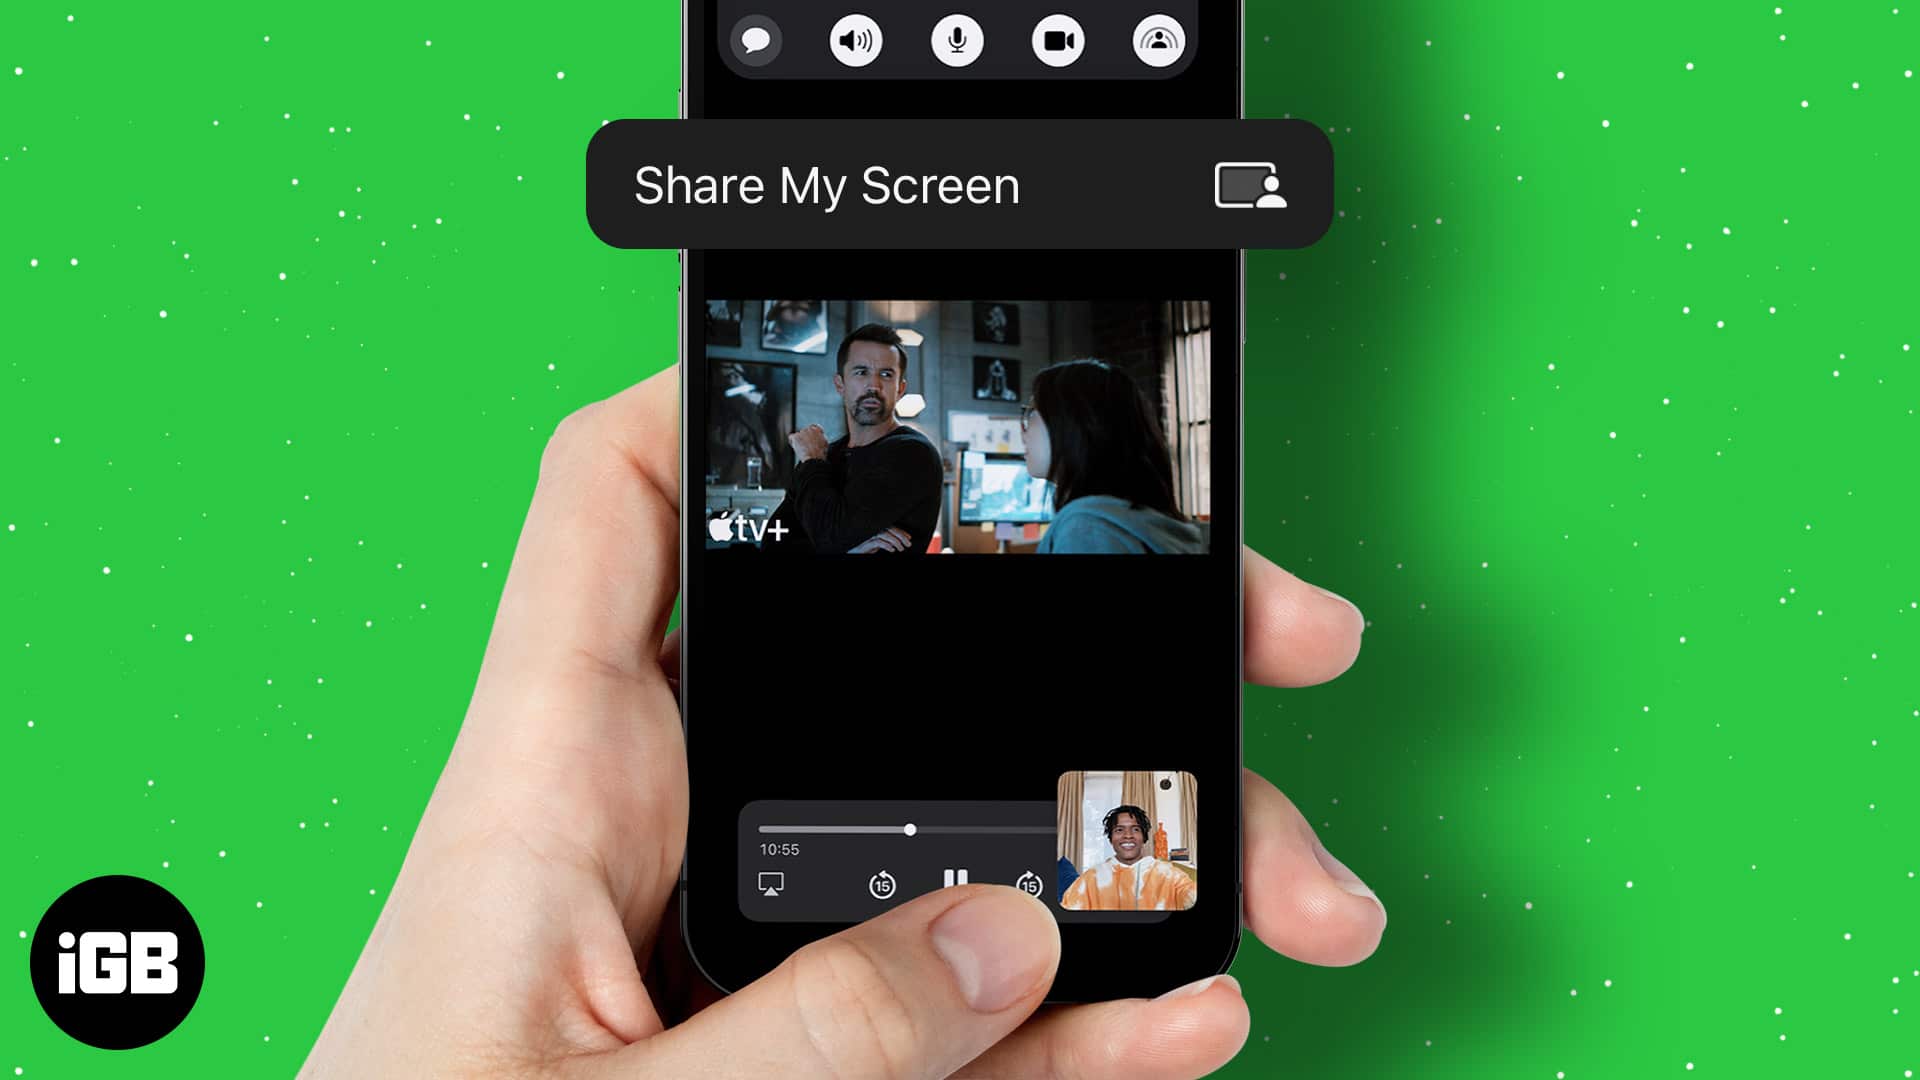 How to share screen on FaceTime using iPhone iPad and Mac